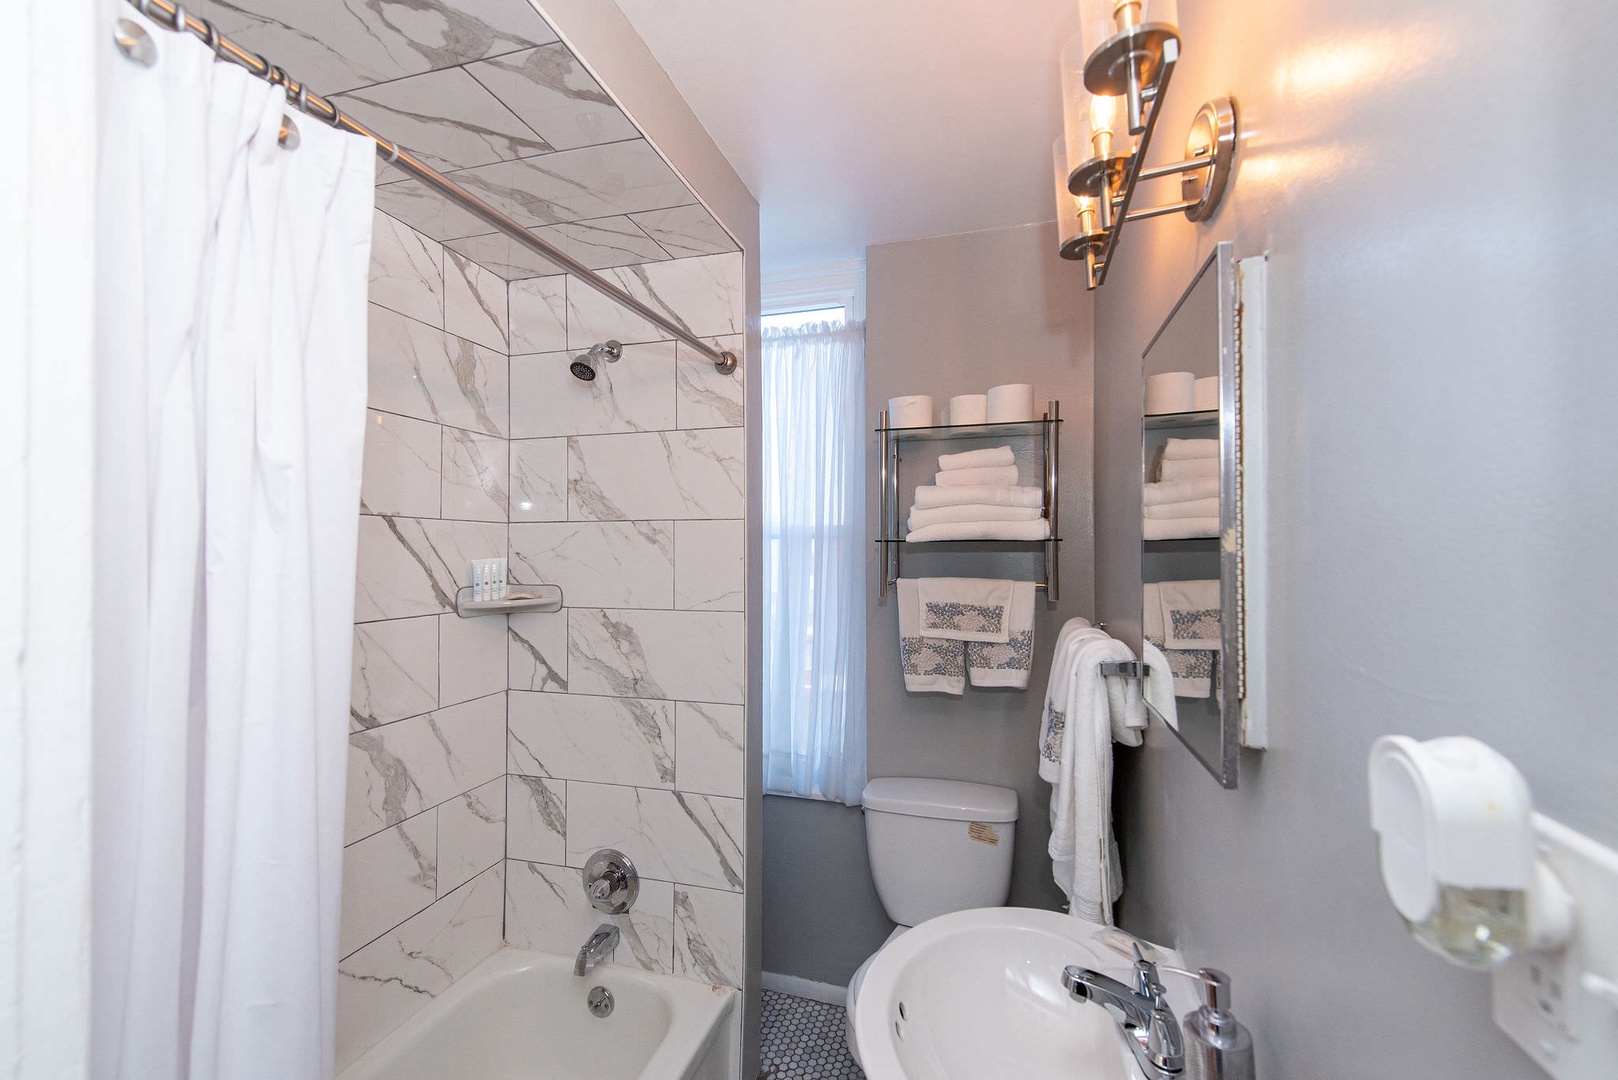 Suite 1 – The full bathroom includes a pedestal sink & shower/tub combo